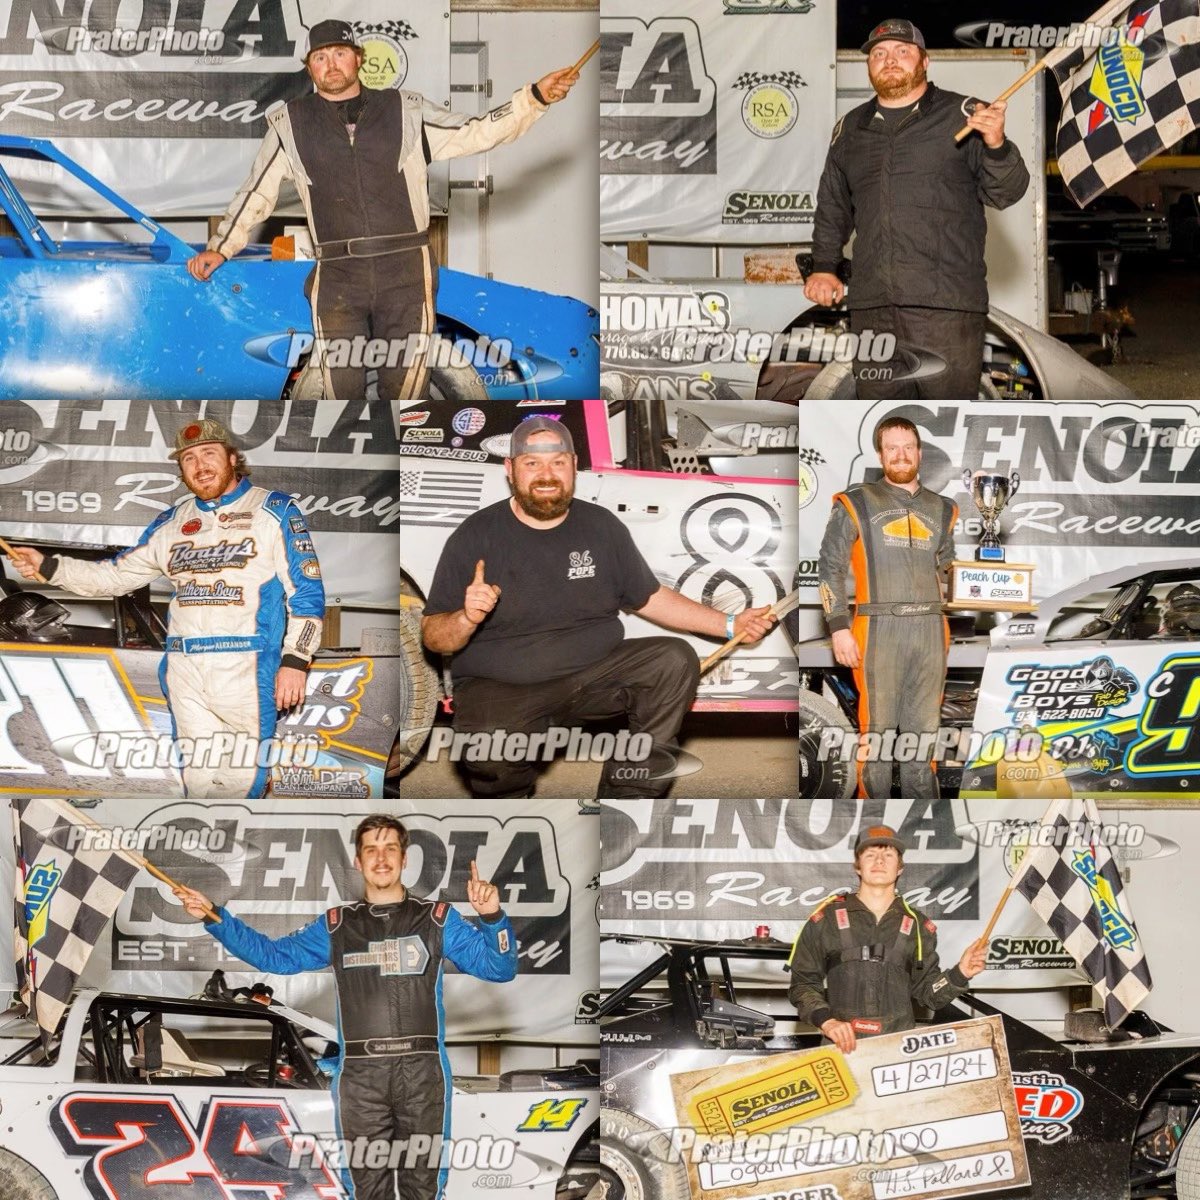 Congratulations to our Senoia Raceway winners from last Saturday night! Don’t forget we’ll be back in action THIS week with Open Practice on Thursday and RACING on Saturday!